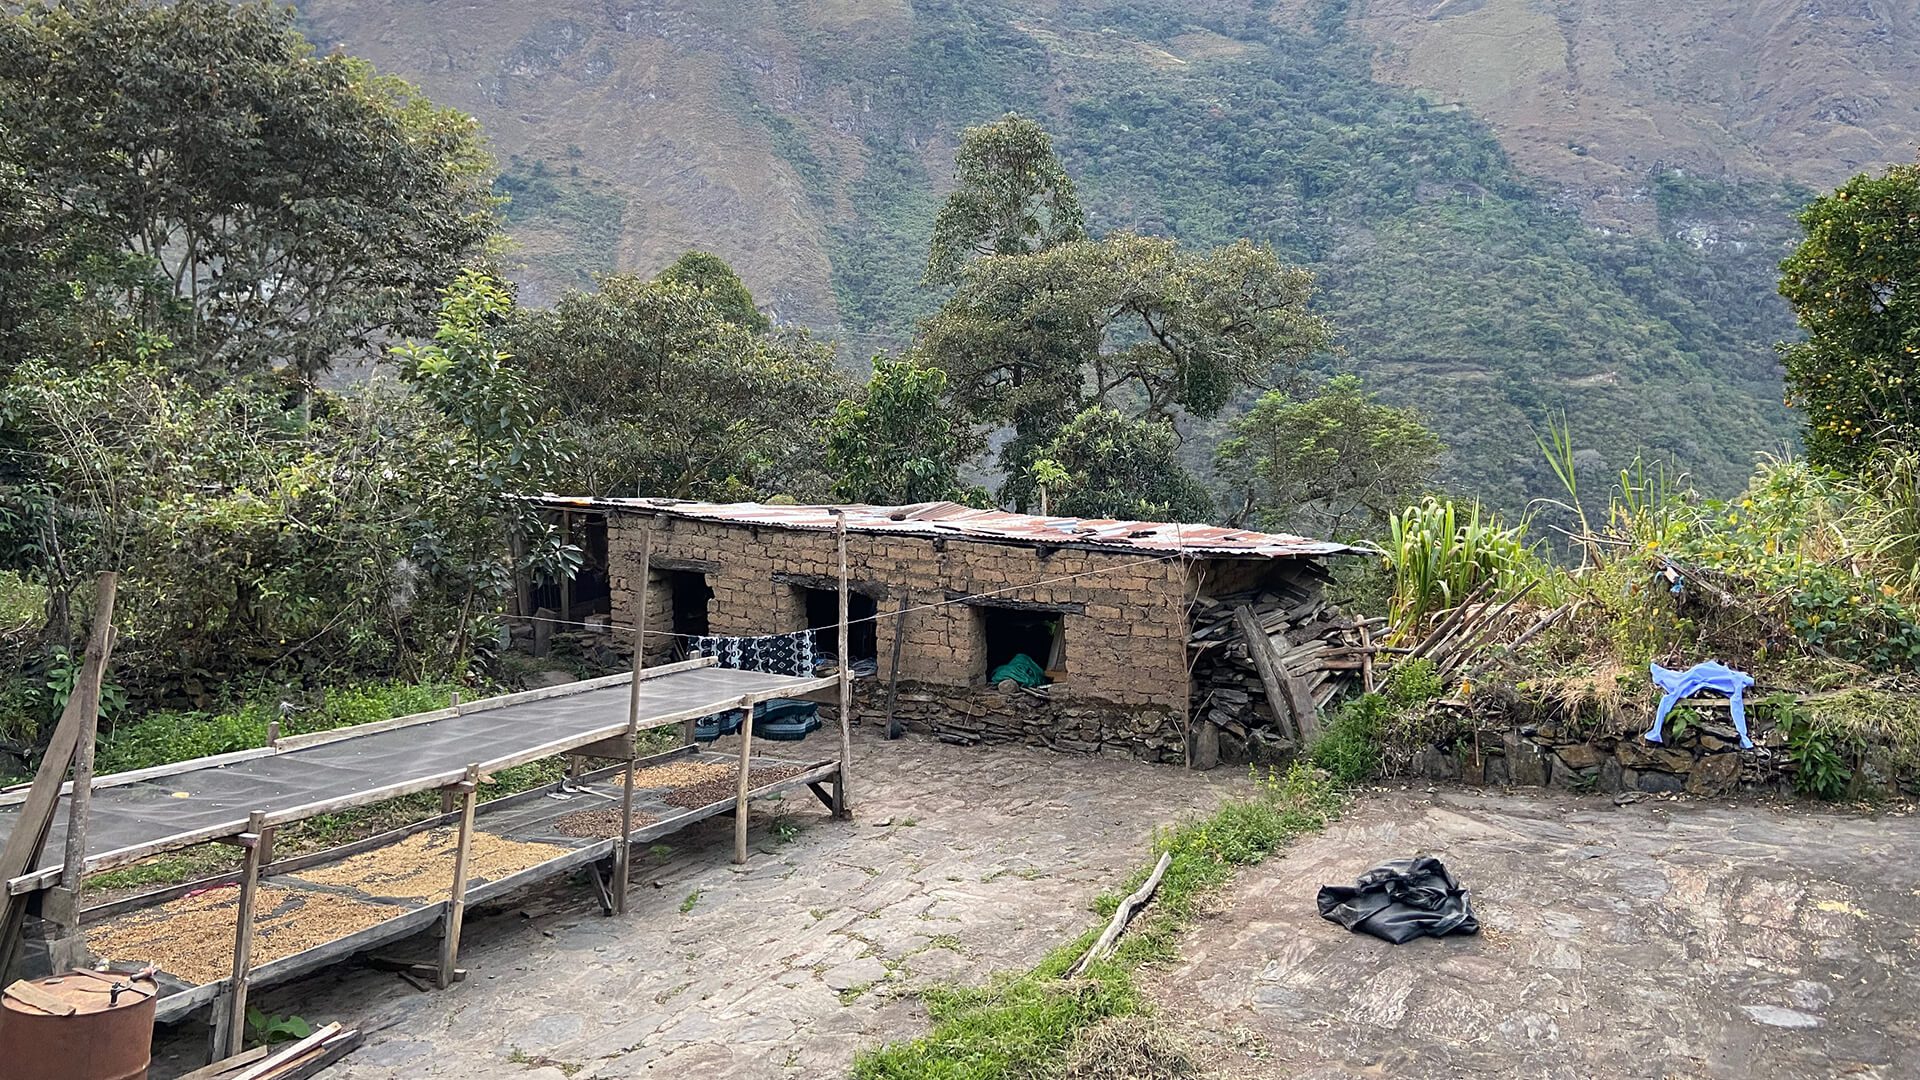 Coffee drying terrace where different stages of dried coffee can be seen - RESPONSible Travel Peru